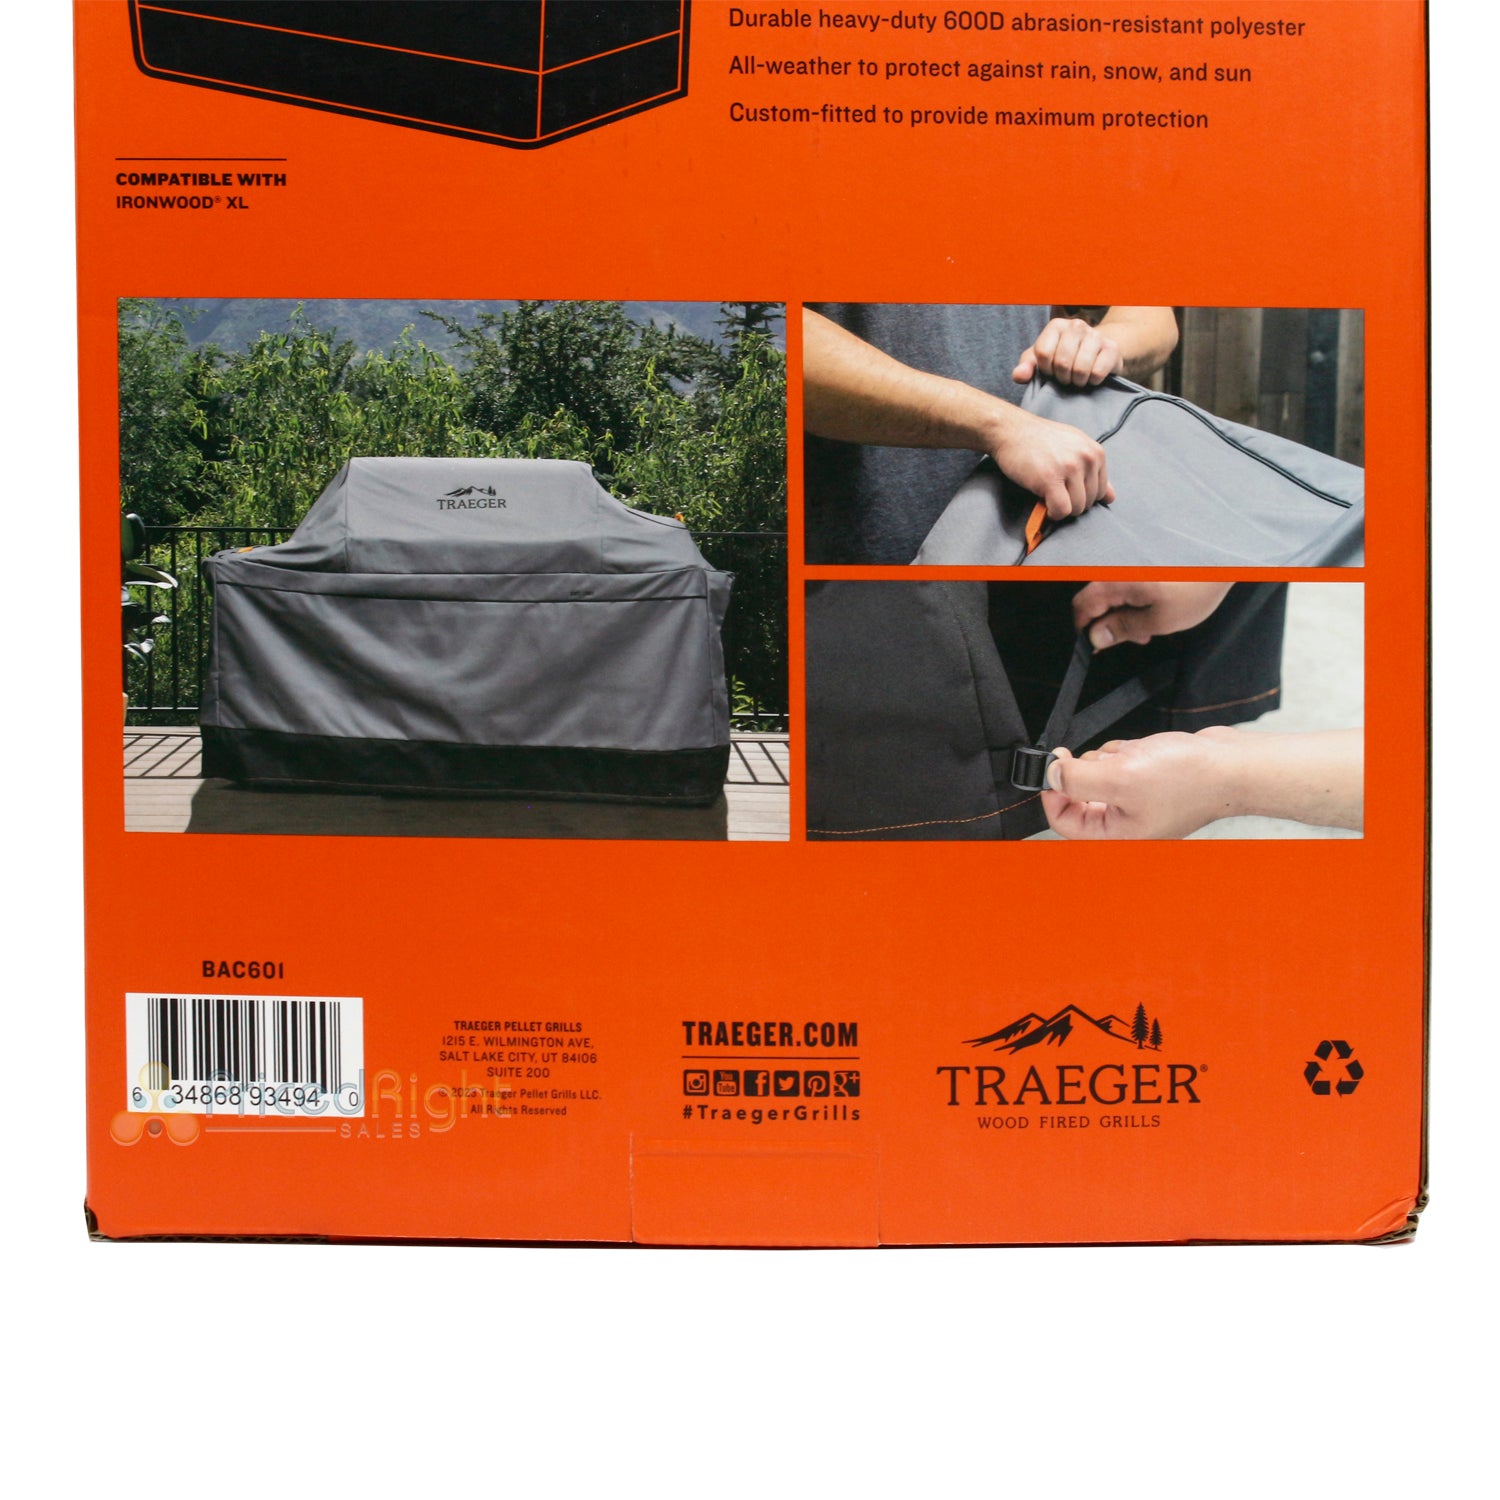 Traeger Ironwood XL All-Weather Full Length 600D Polyester Grill Cover Gray